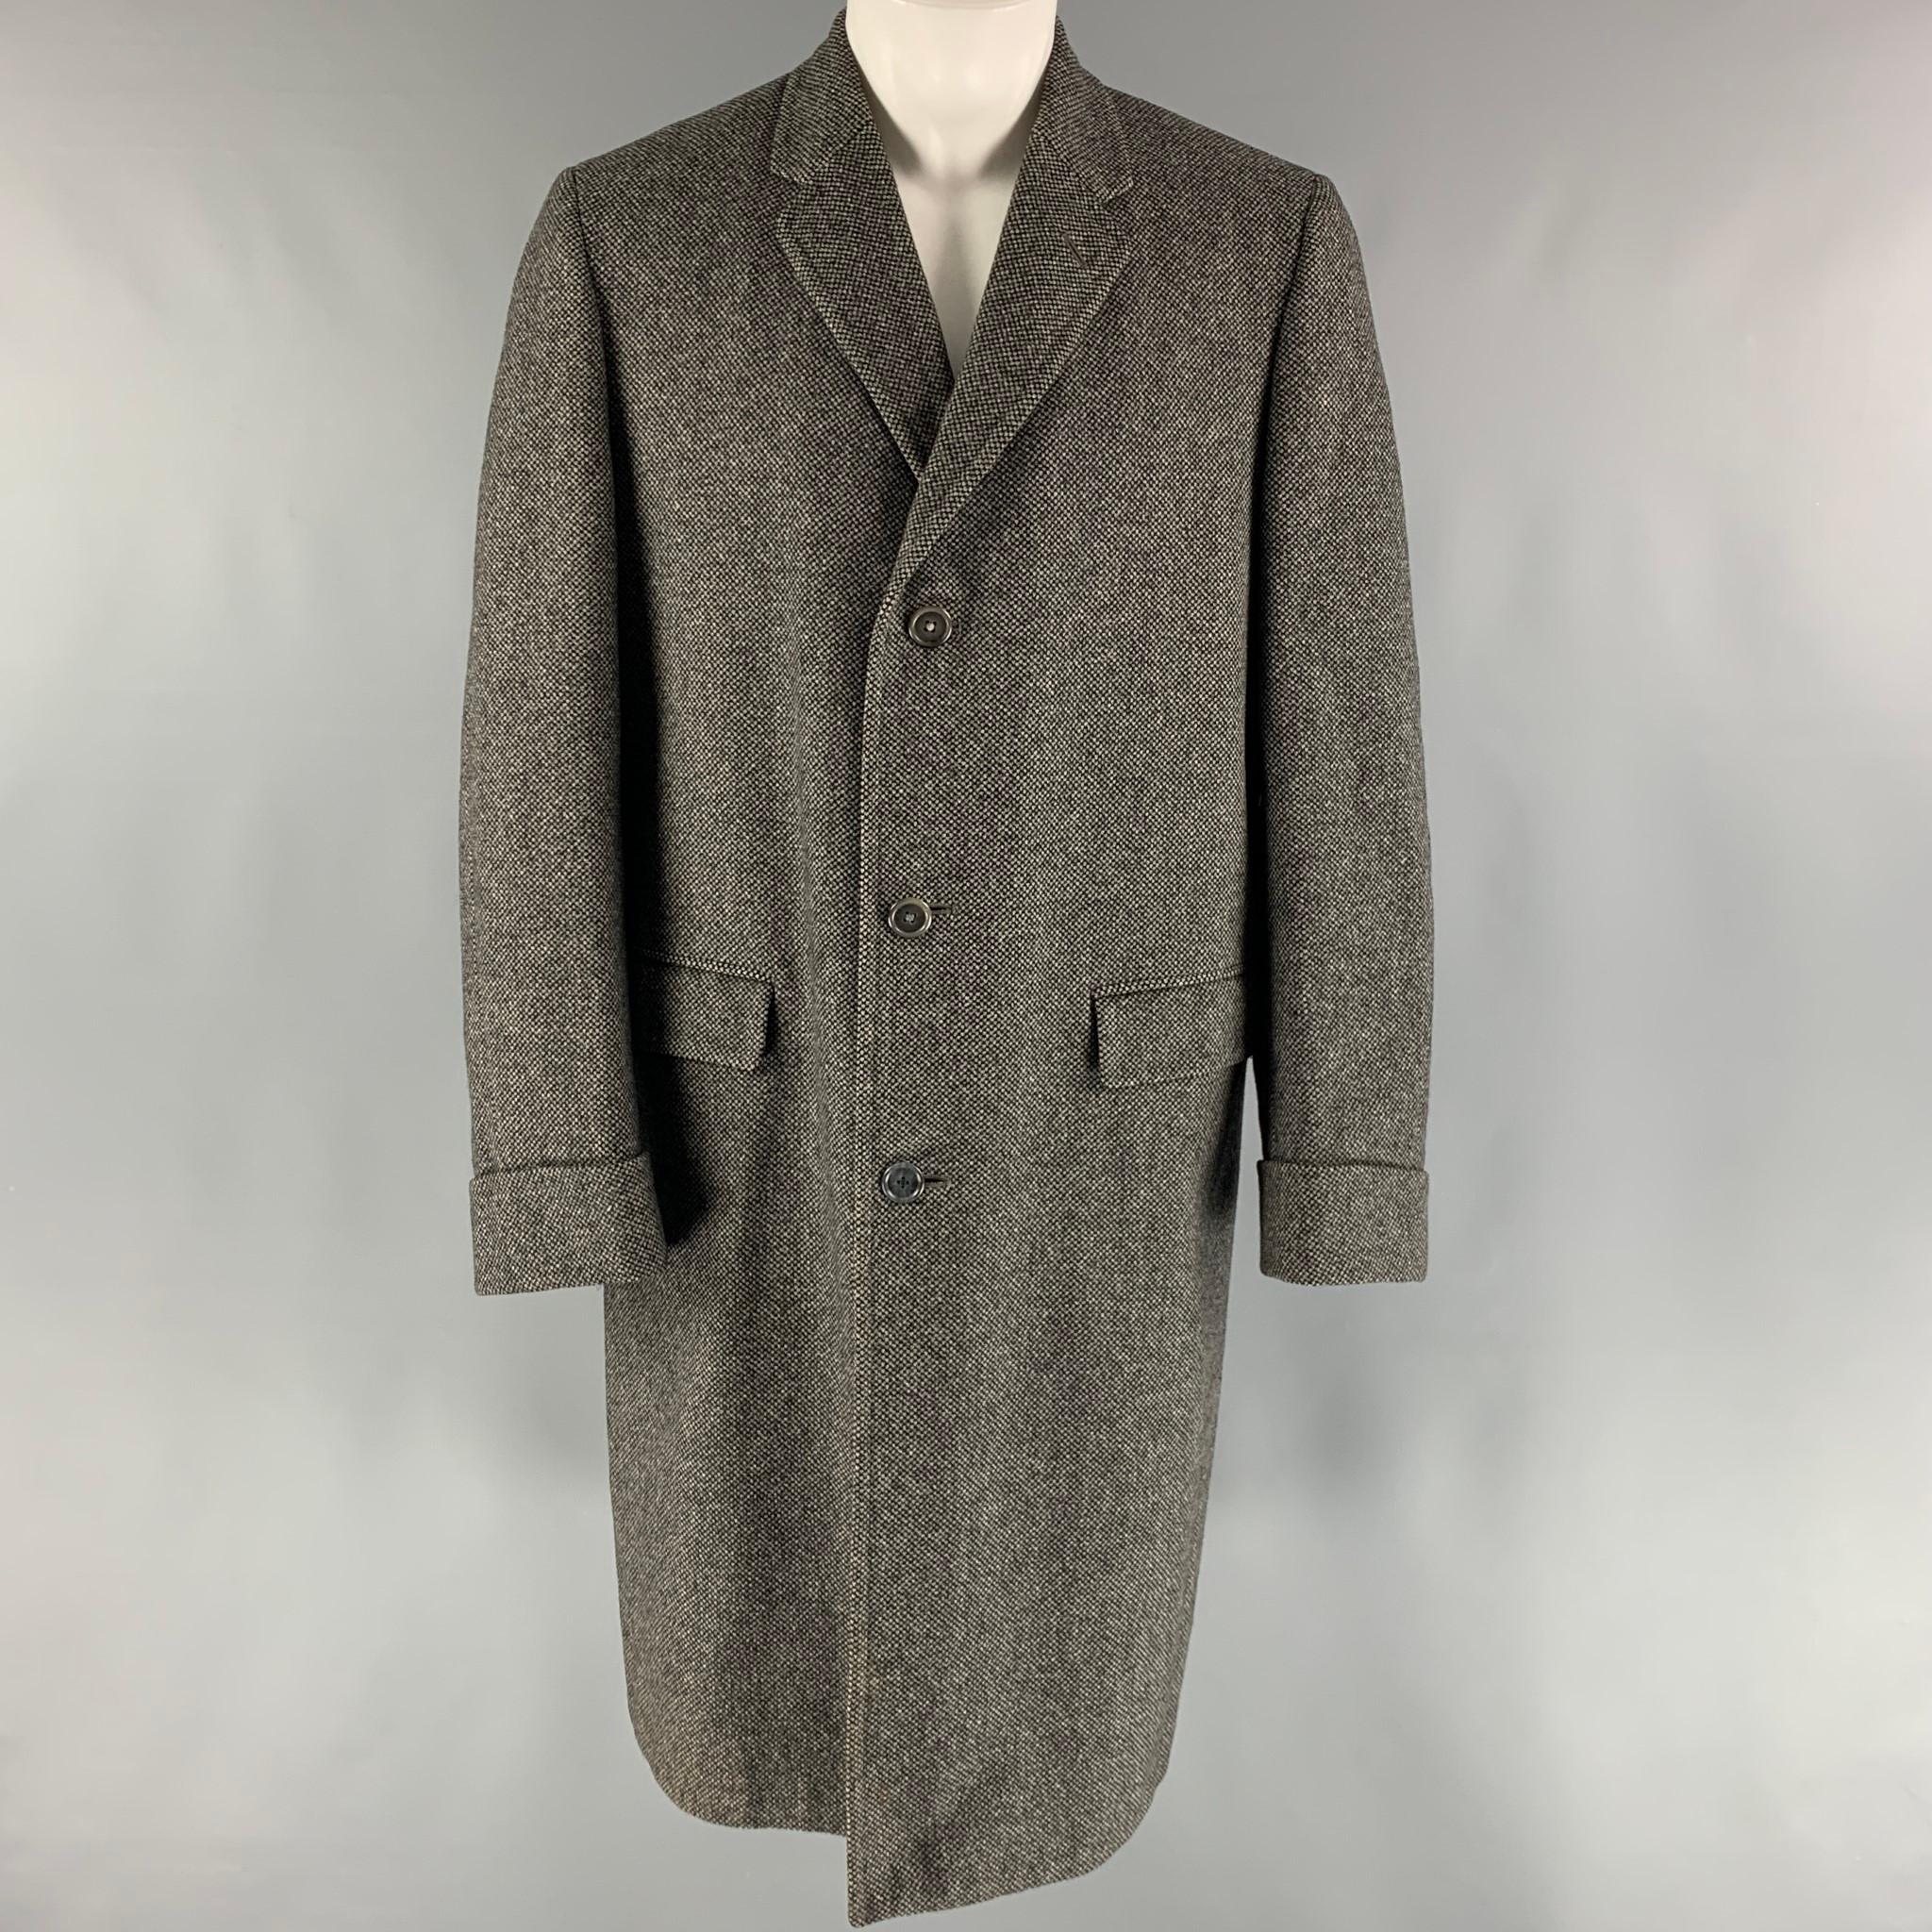 BURBERRYS VINTAGE Long Coat comes in a black and grey nailhead wool woven material, with a notch lapel, flap pockets, three buttons at closure, single breasted, and a single vent at back. Made in England.

Excellent Pre-Owned Condition.
Marked: no